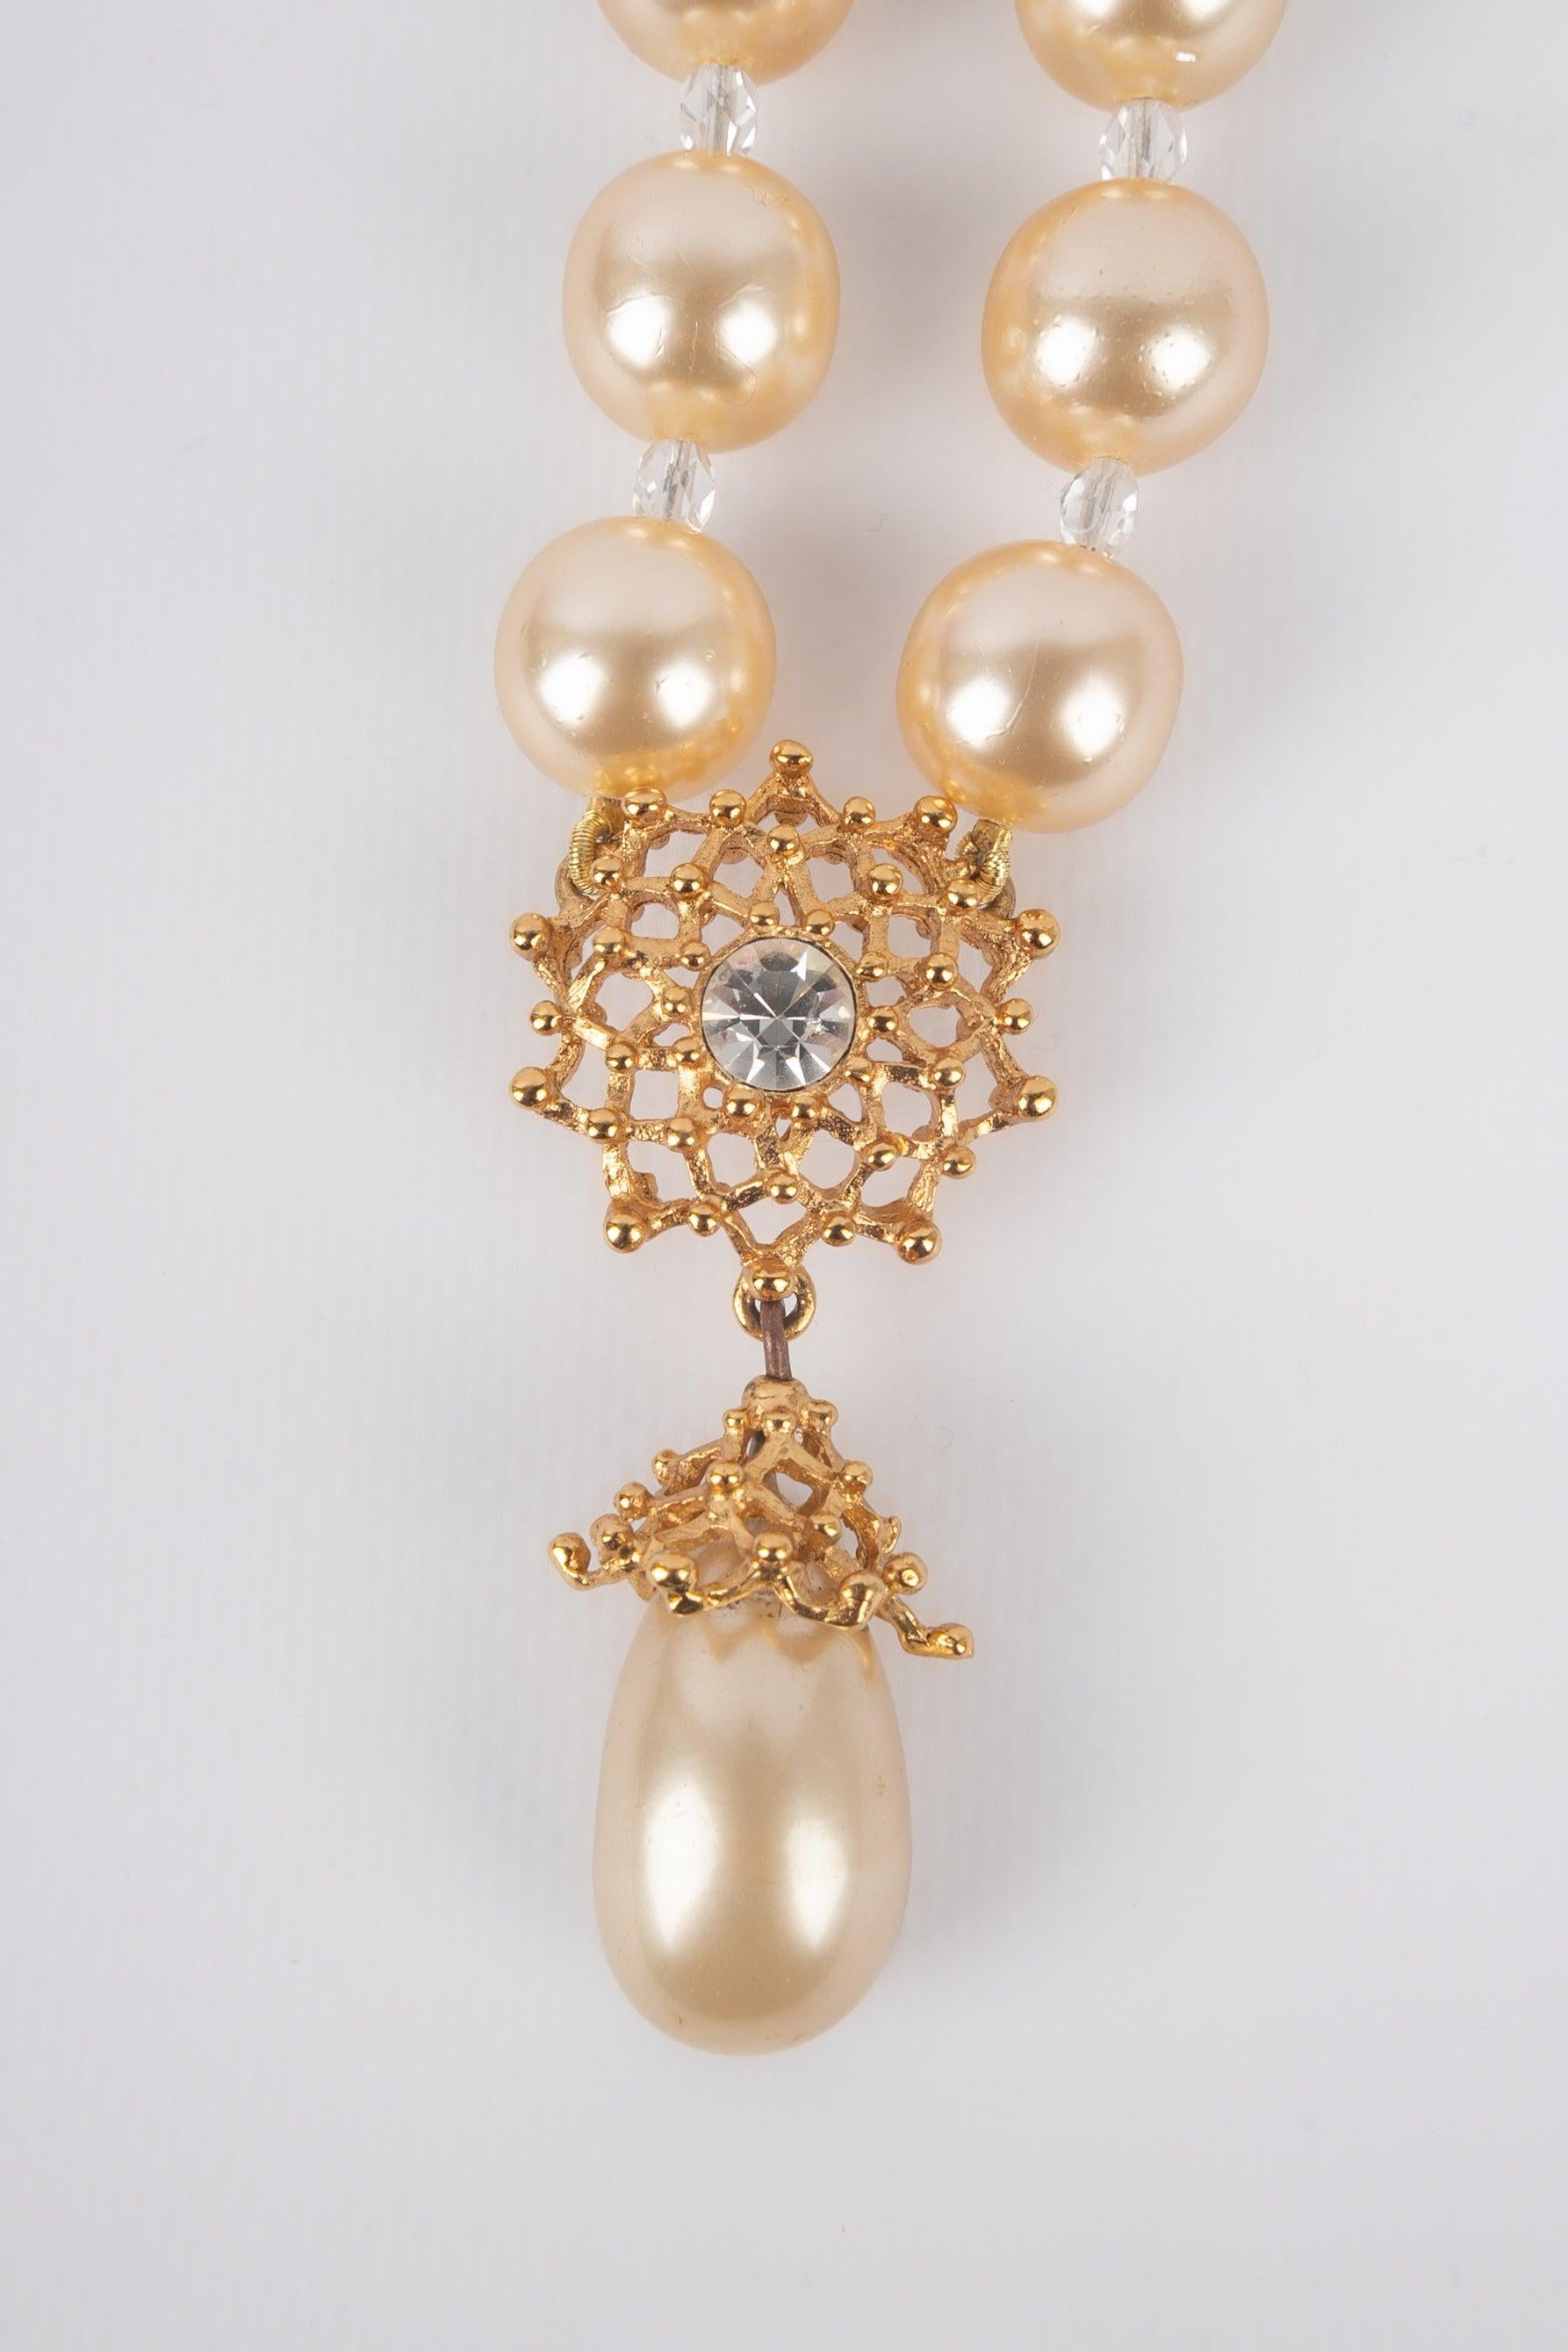 Women's Yves Saint Laurent Costume Pearl Necklace with Rhinestones, 1980s